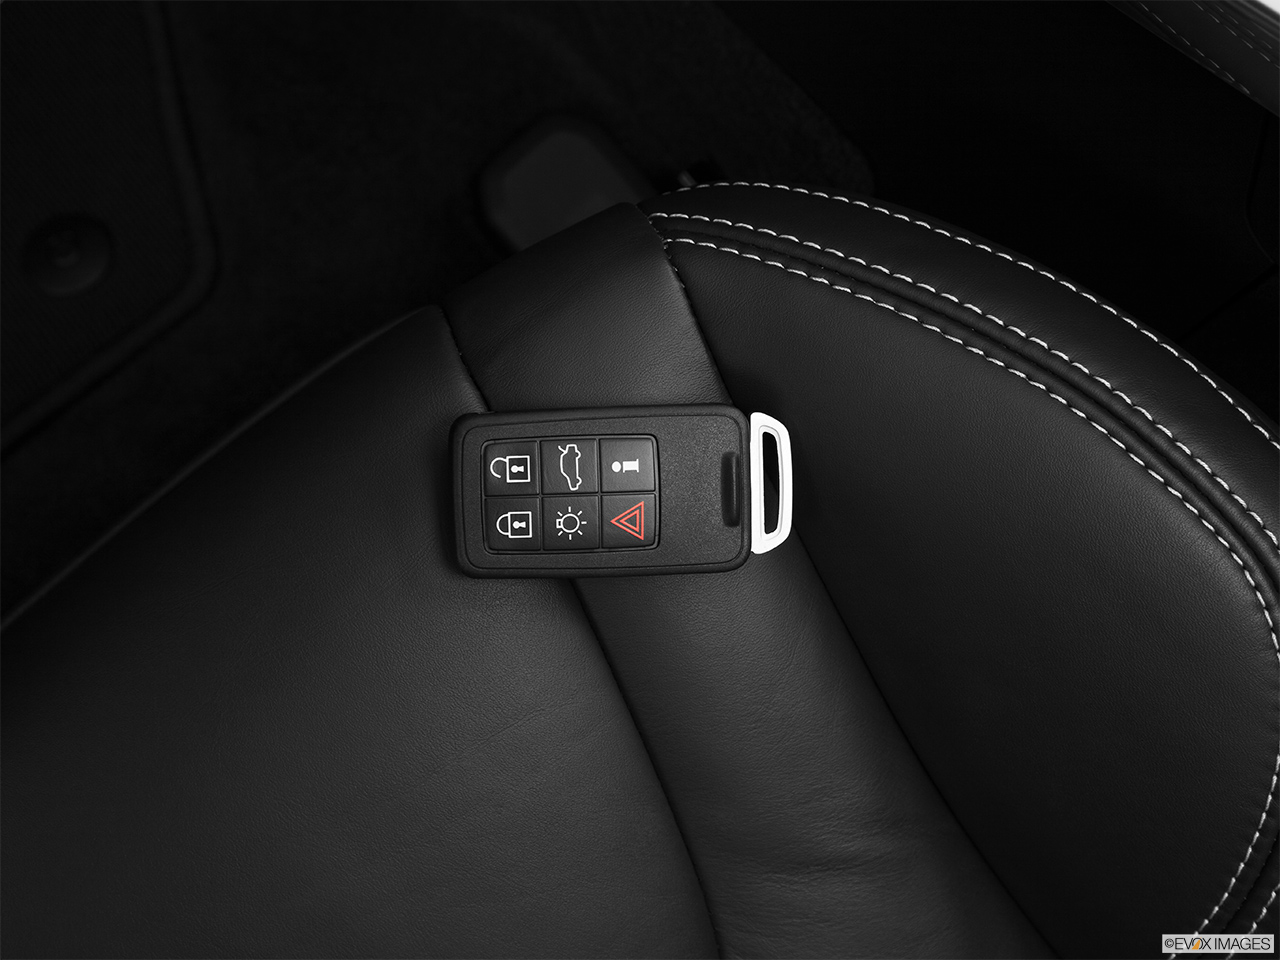 2014 Volvo S60 T5 FWD Premier Plus Key fob on driver's seat. 